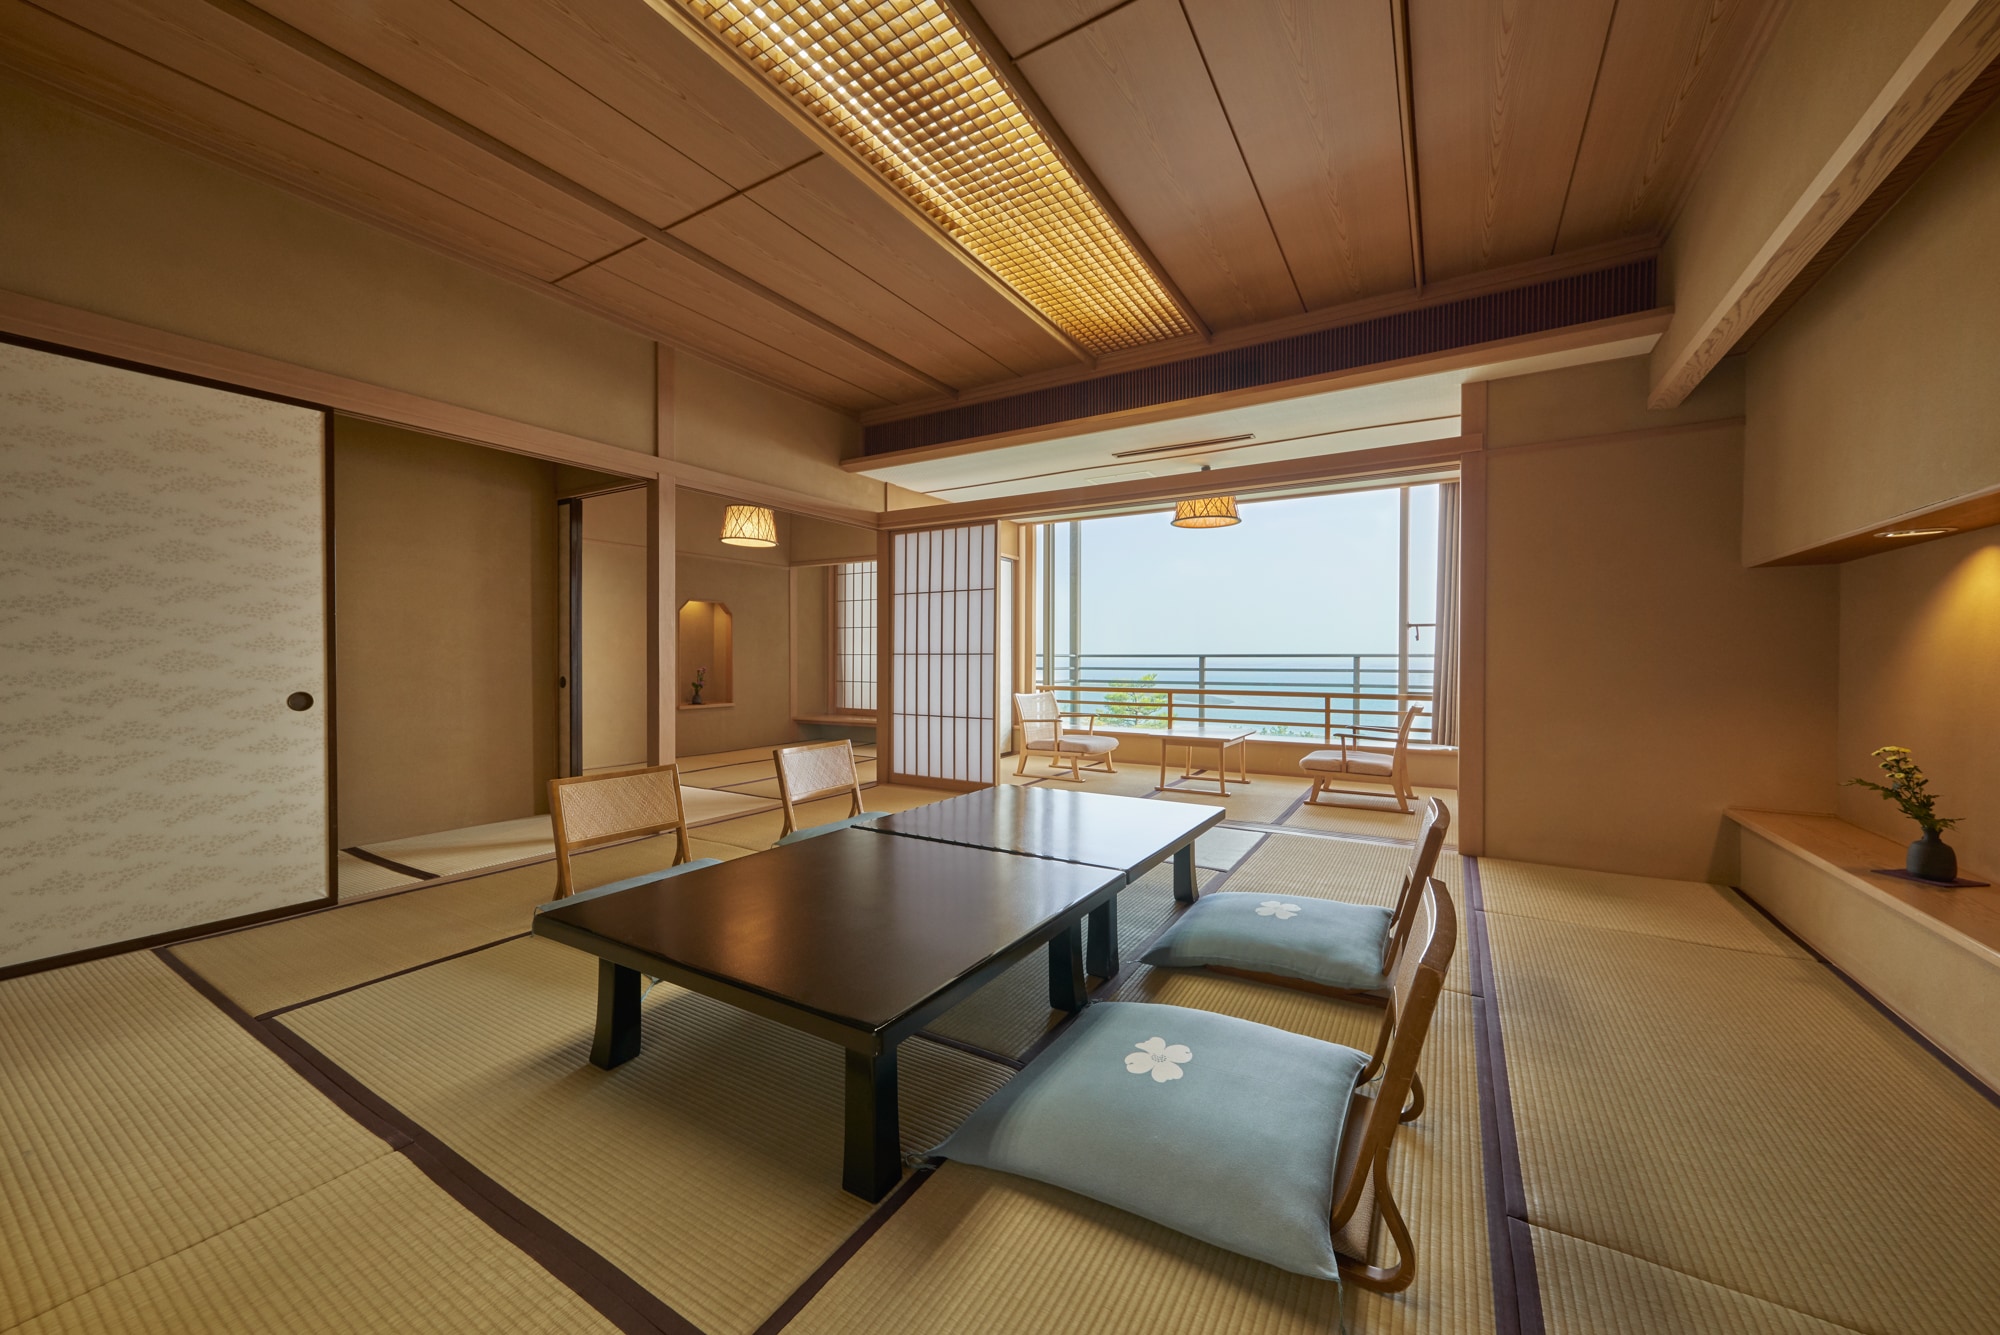 Main building standard type Japanese-style room